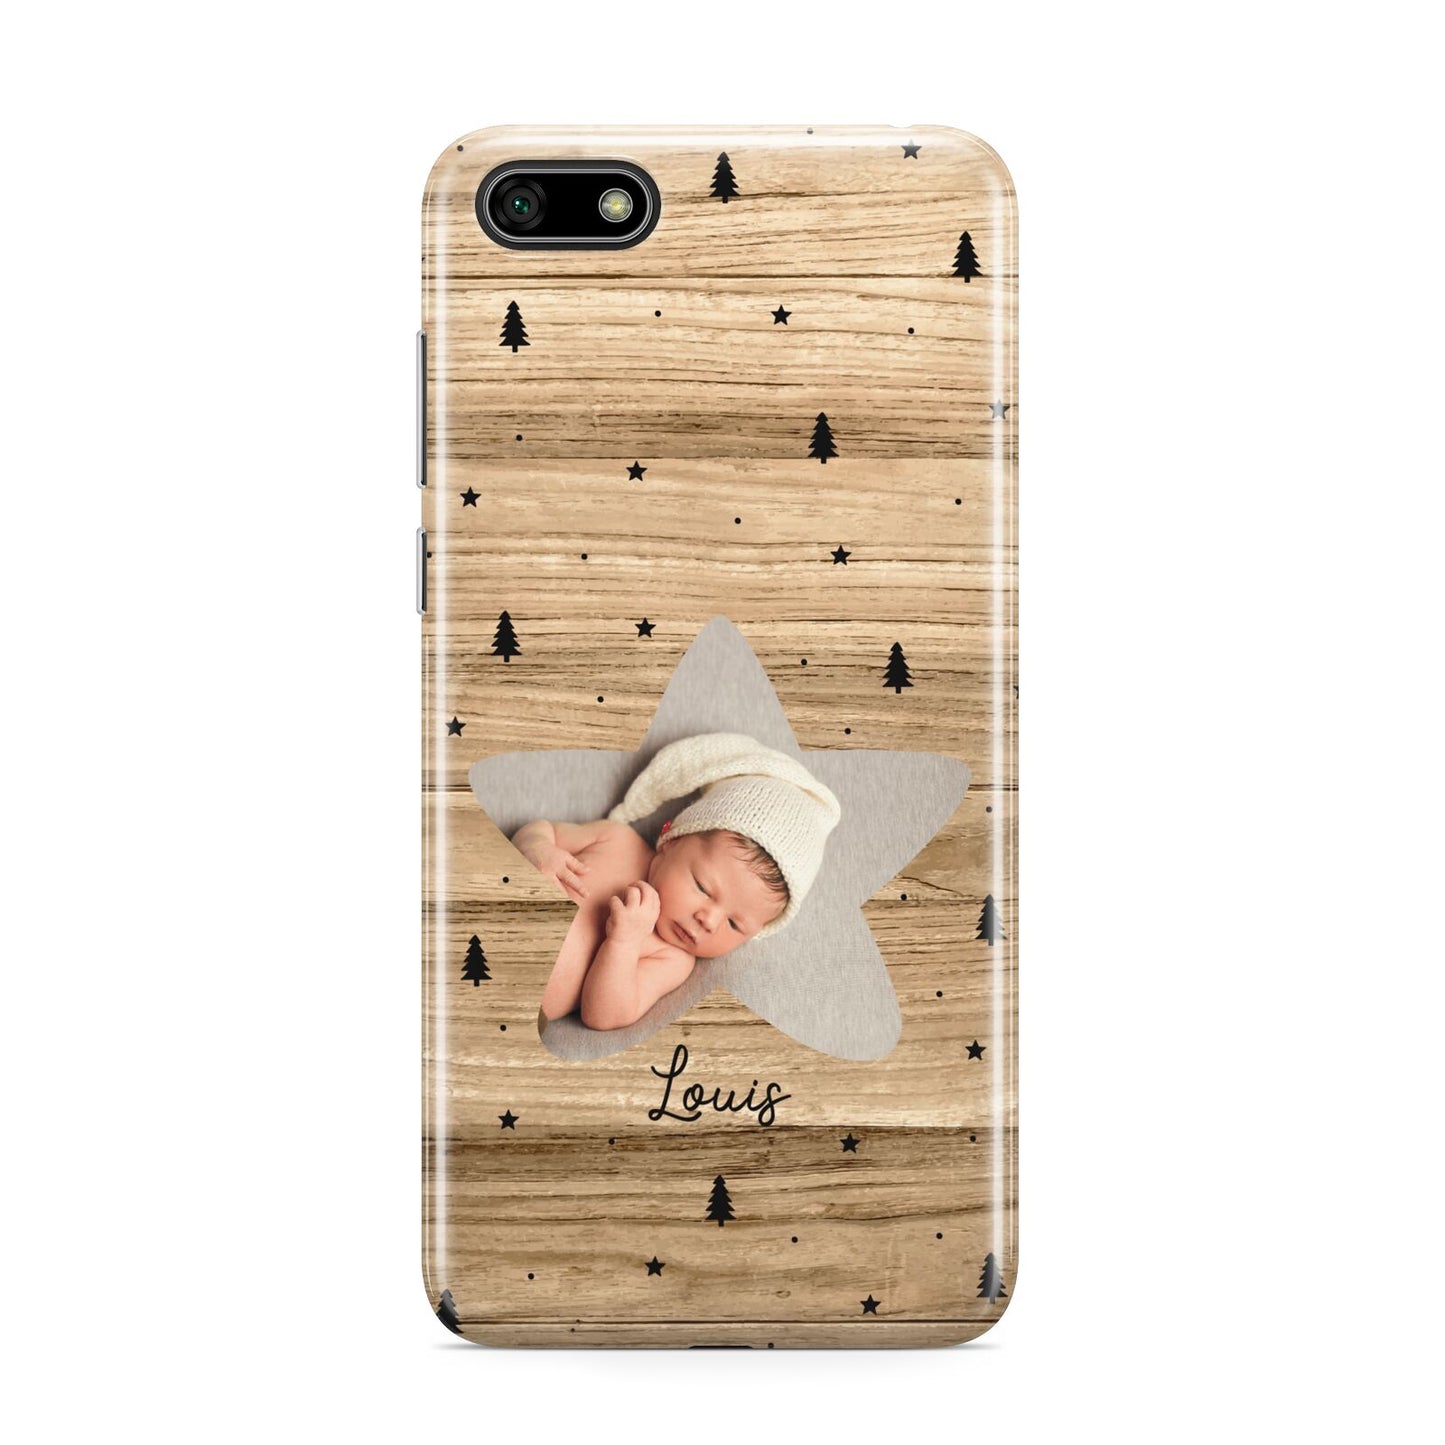 Baby Photo Upload Huawei Y5 Prime 2018 Phone Case